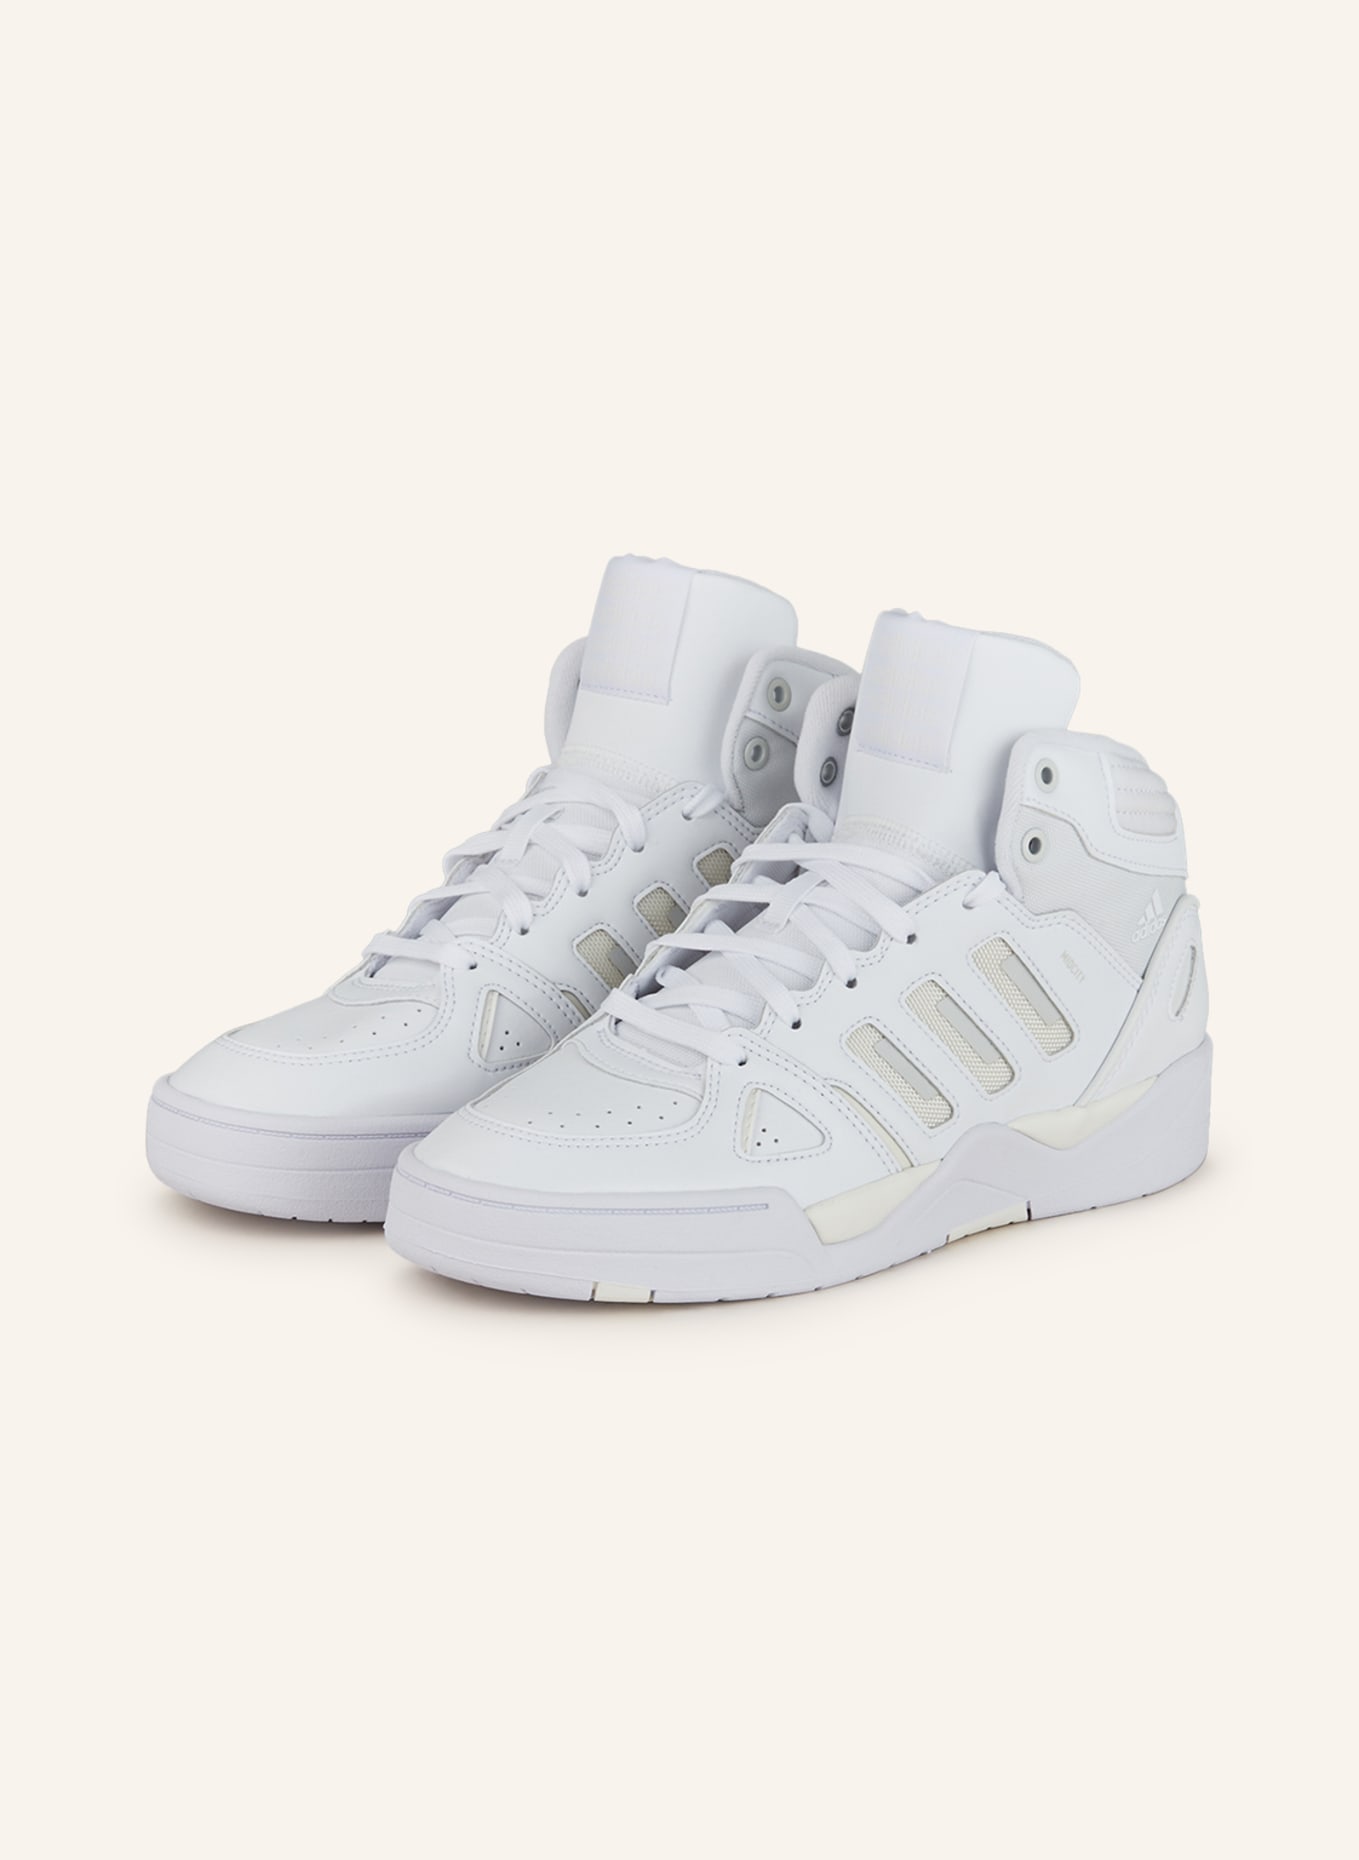 Update more than 178 high cut sneakers adidas latest